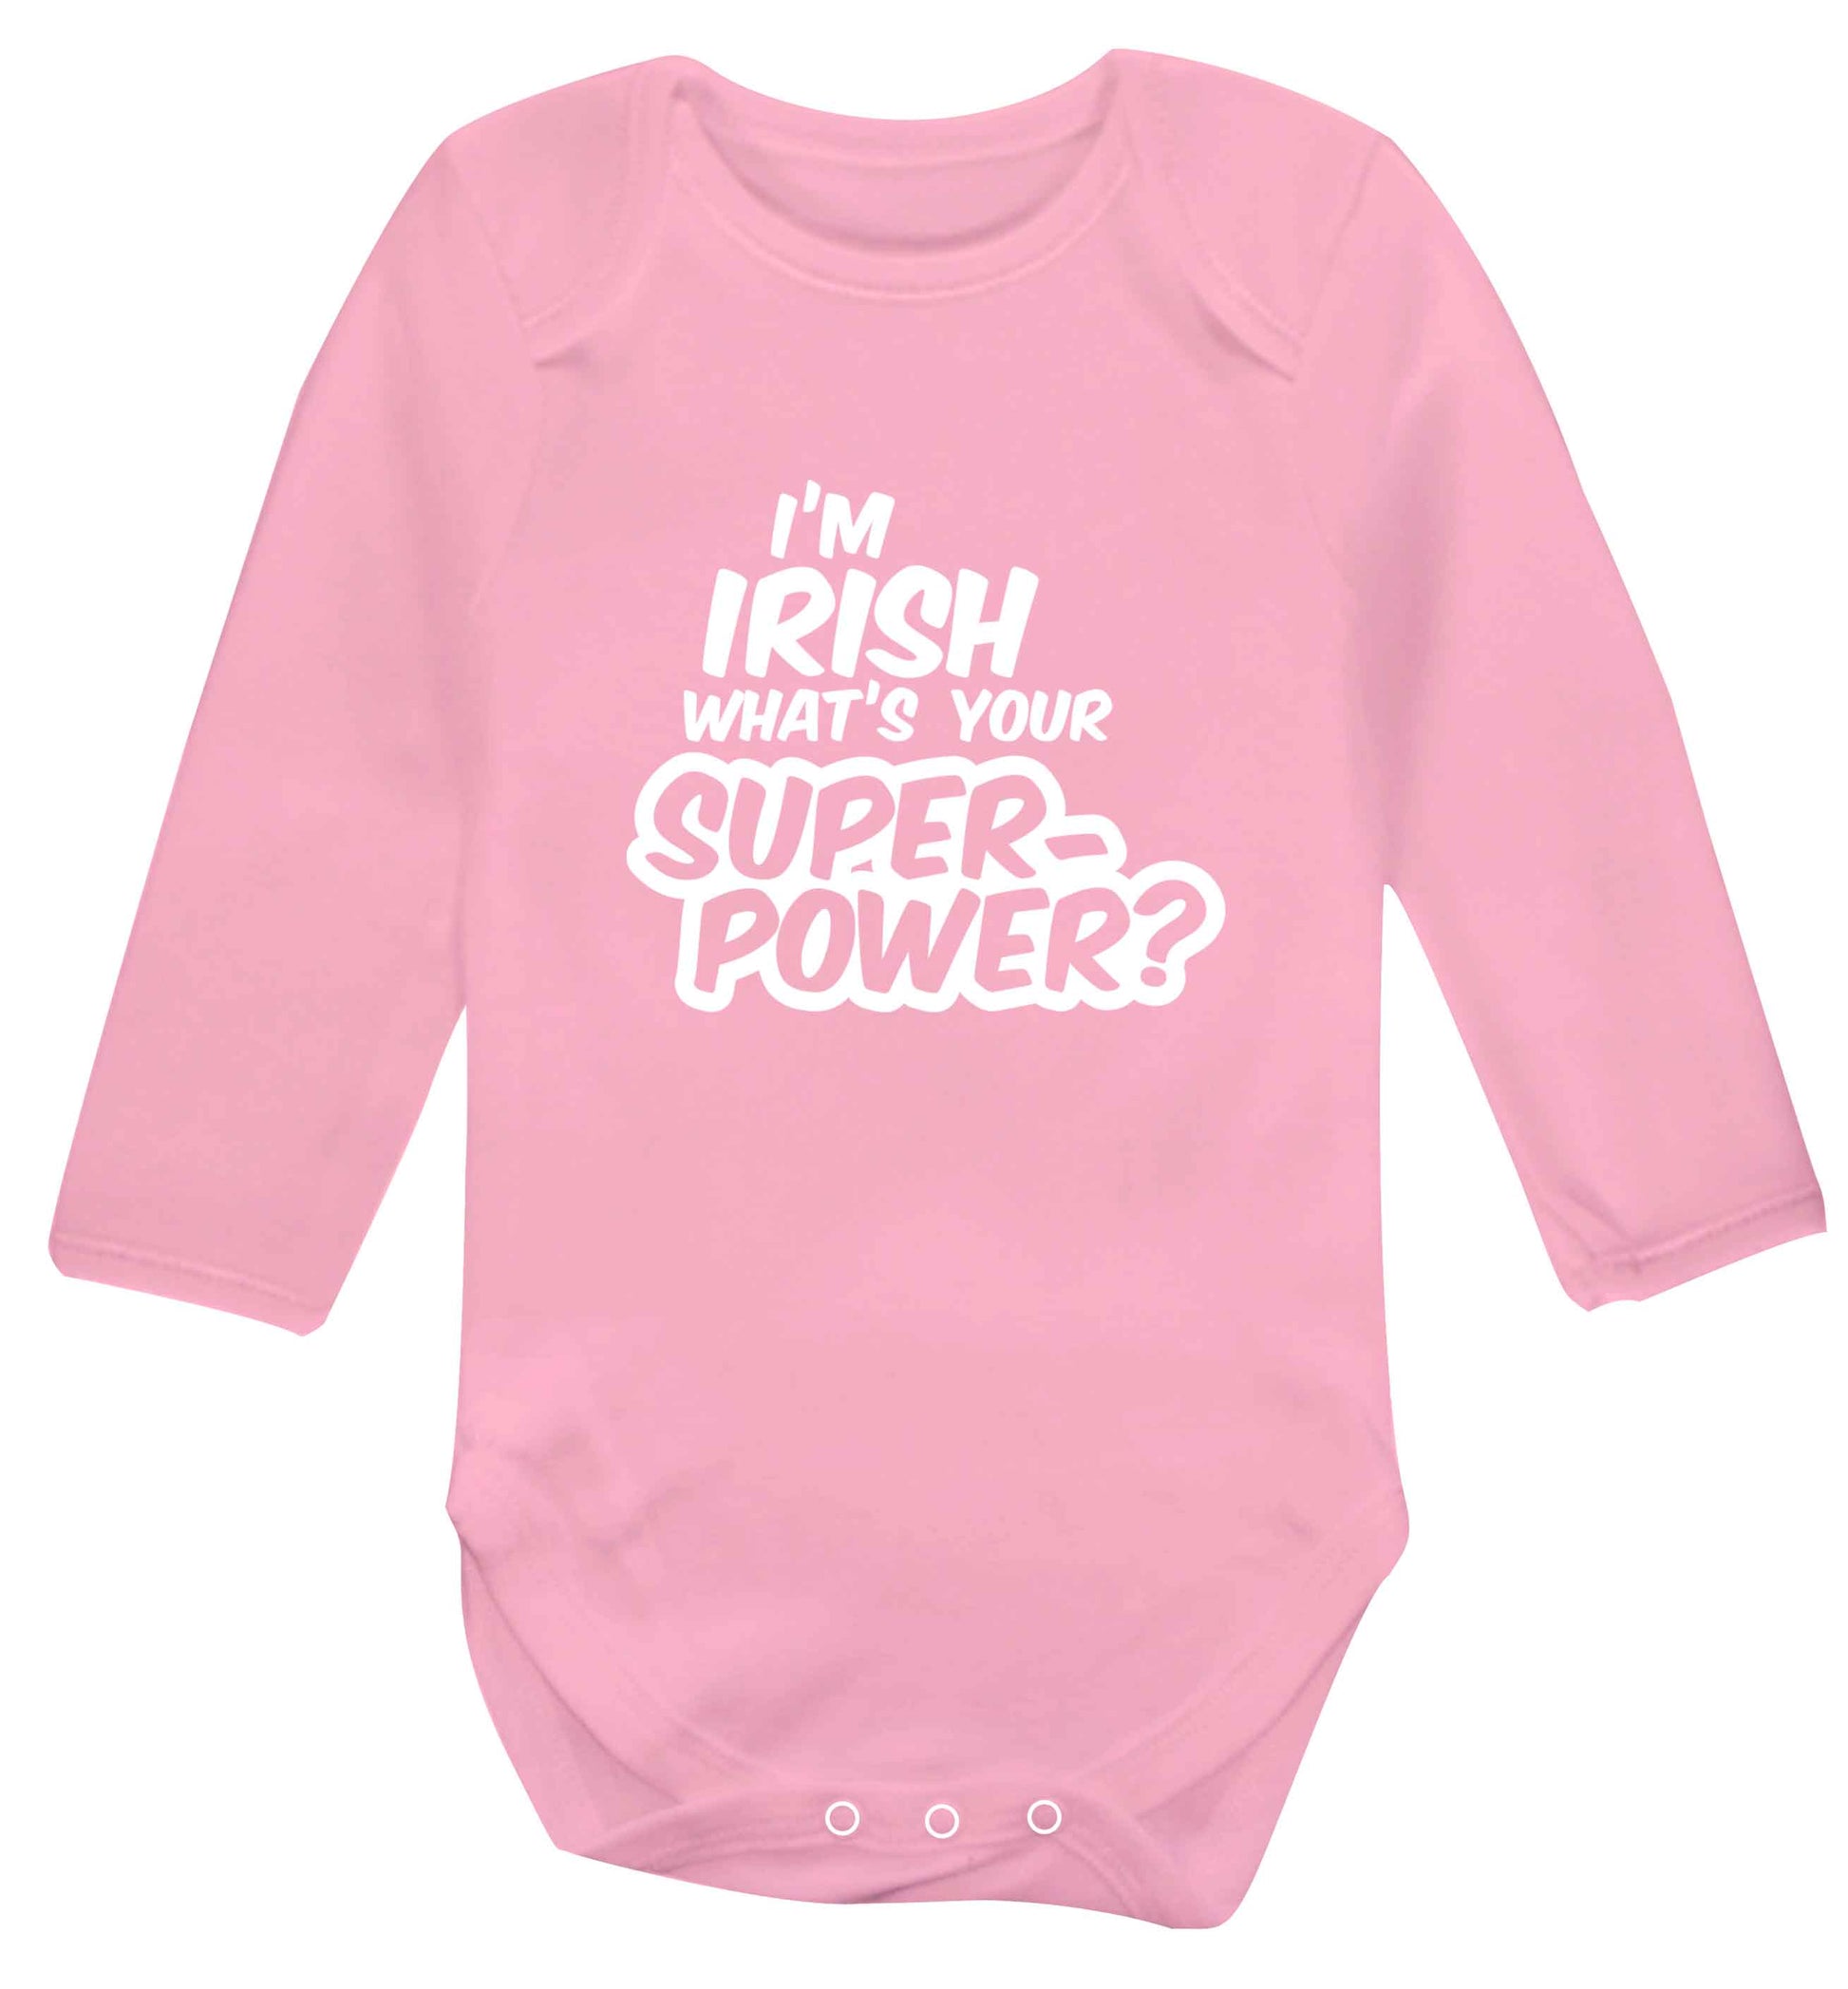 I'm Irish what's your superpower? baby vest long sleeved pale pink 6-12 months